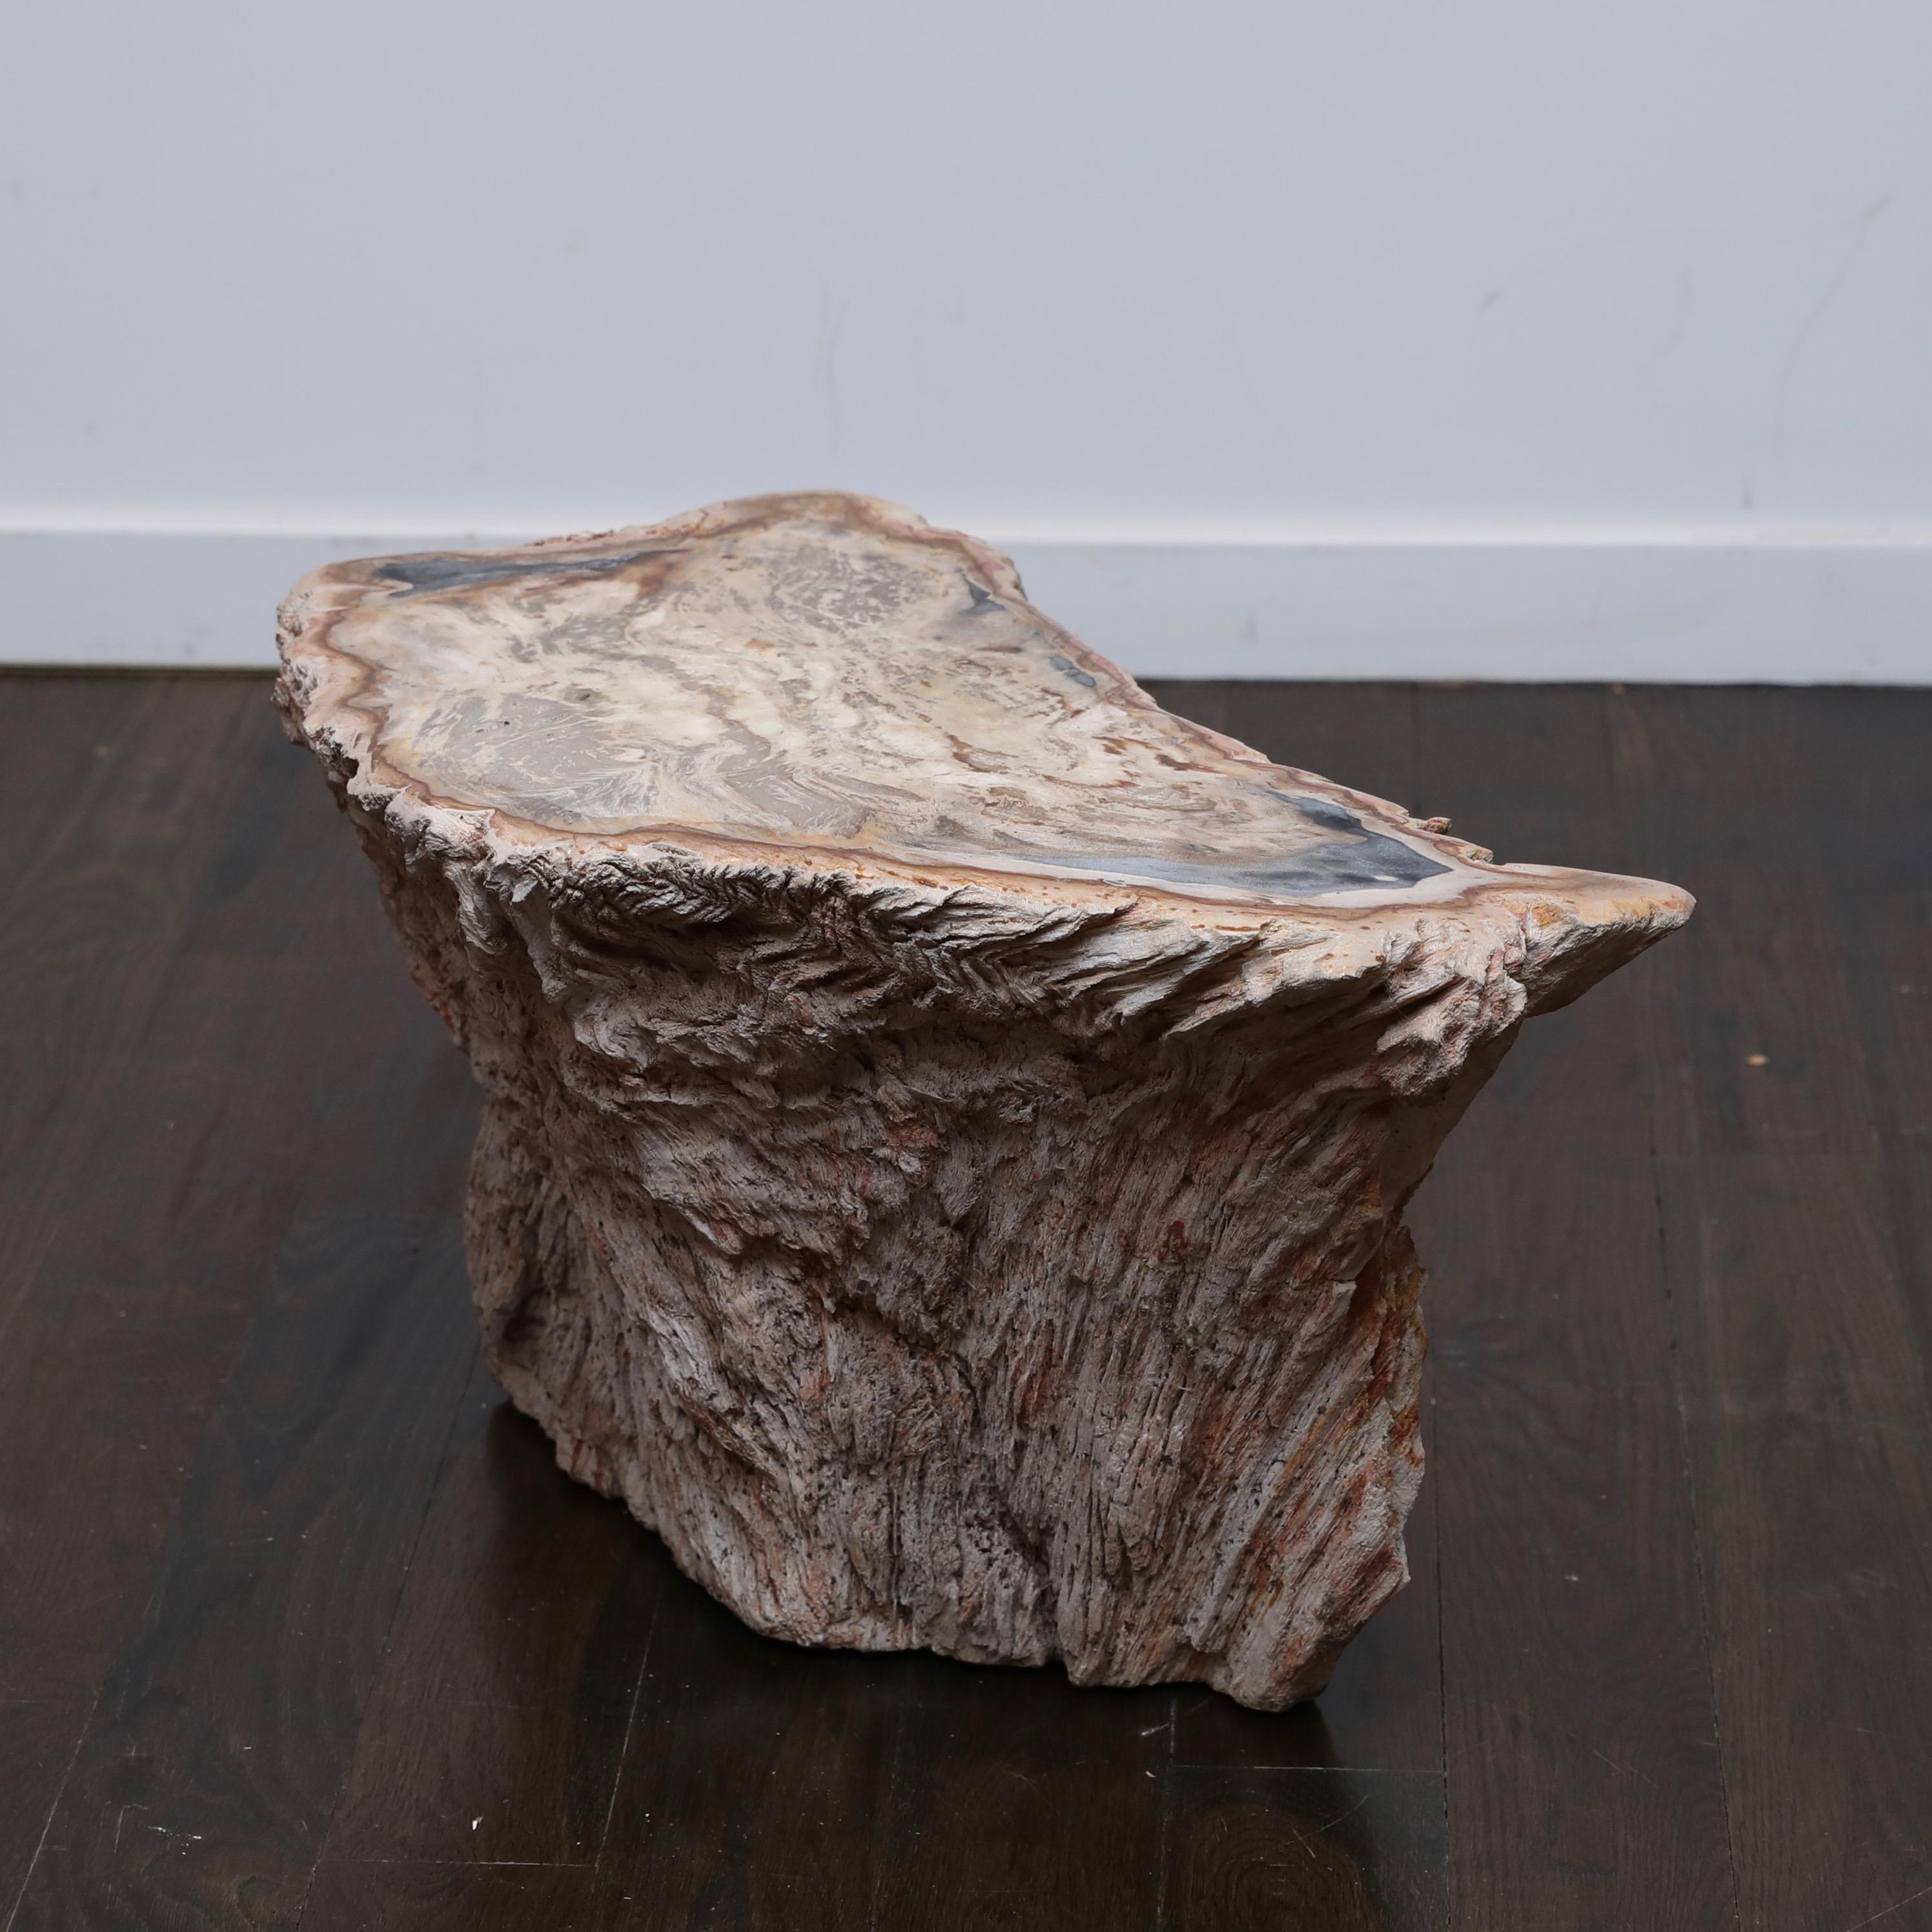 1970s era side table made from a large cross section of a fossilized tree trunk with oxide-red and blue-grey highlights. Purchased for $6500 from Bernd Goeckler Antiques in NYC, this makes the perfect statement piece between or alongside an equally